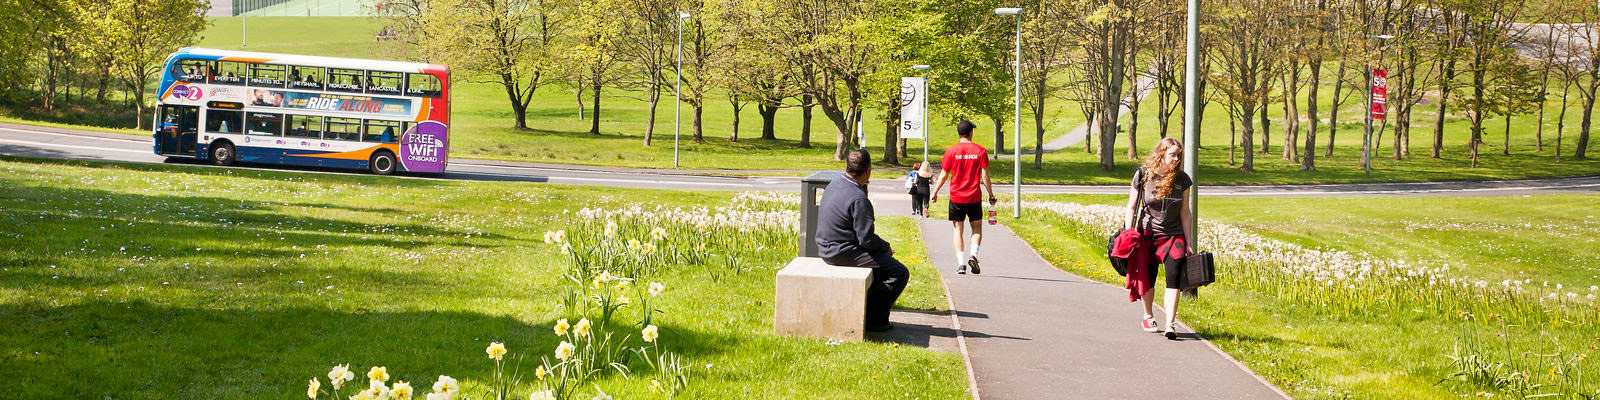 Students walking within the grounds of Lancaster university campus